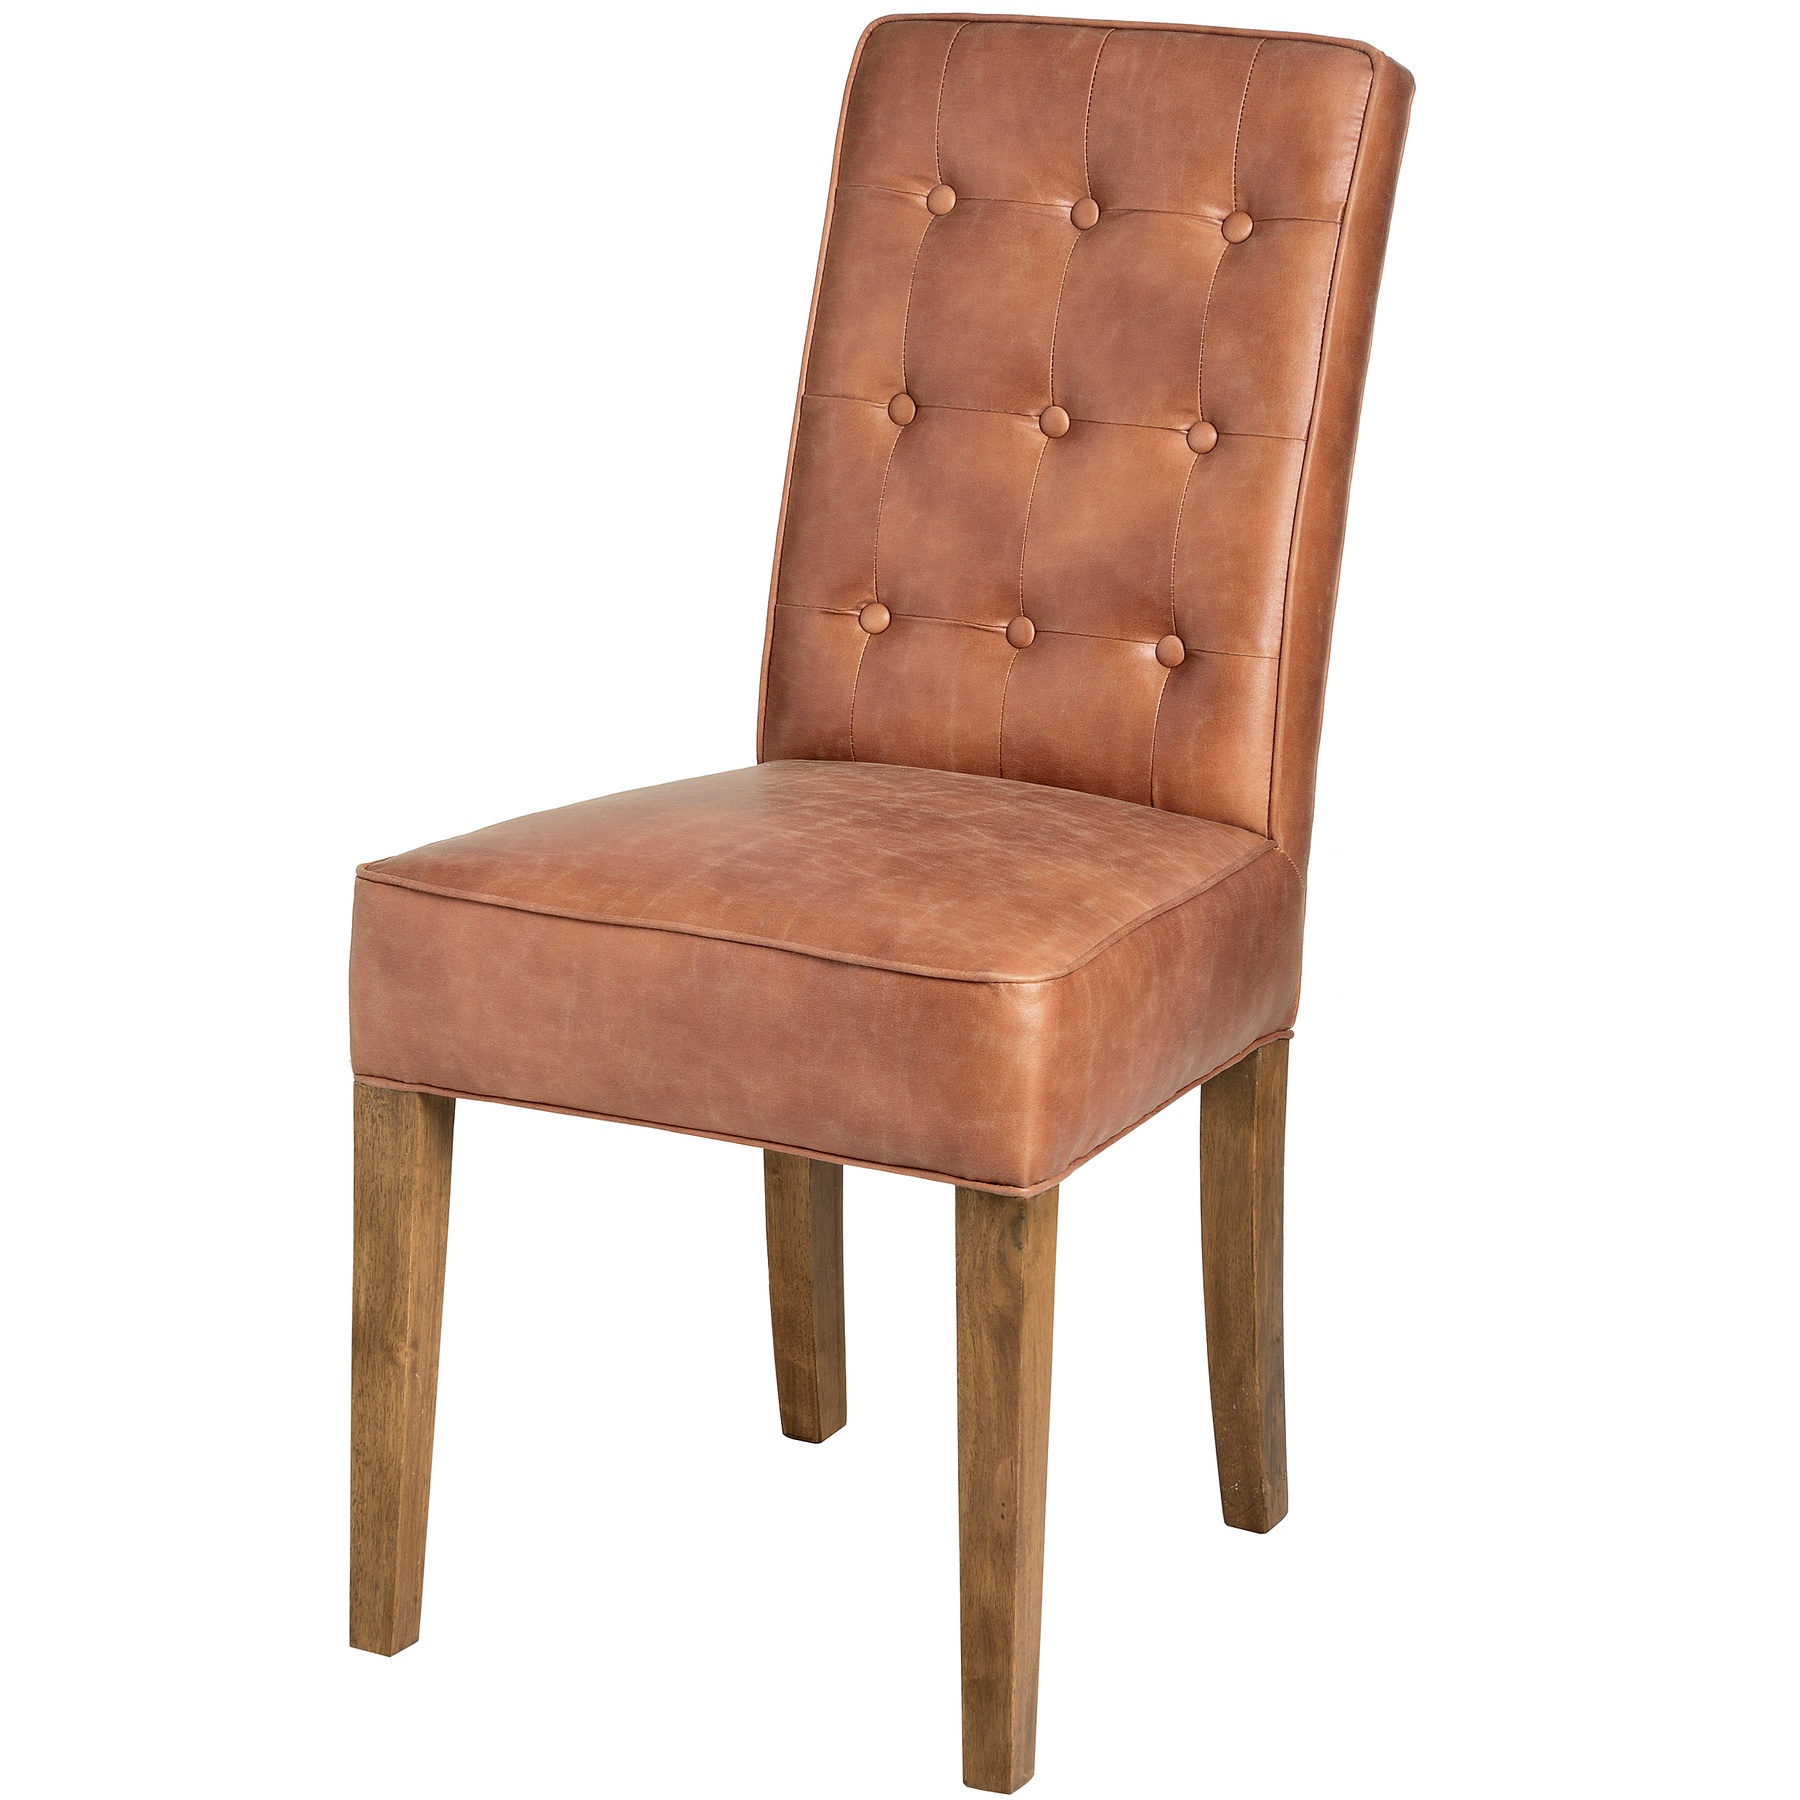 Tan Faux Leather Dining Chair - Image 1